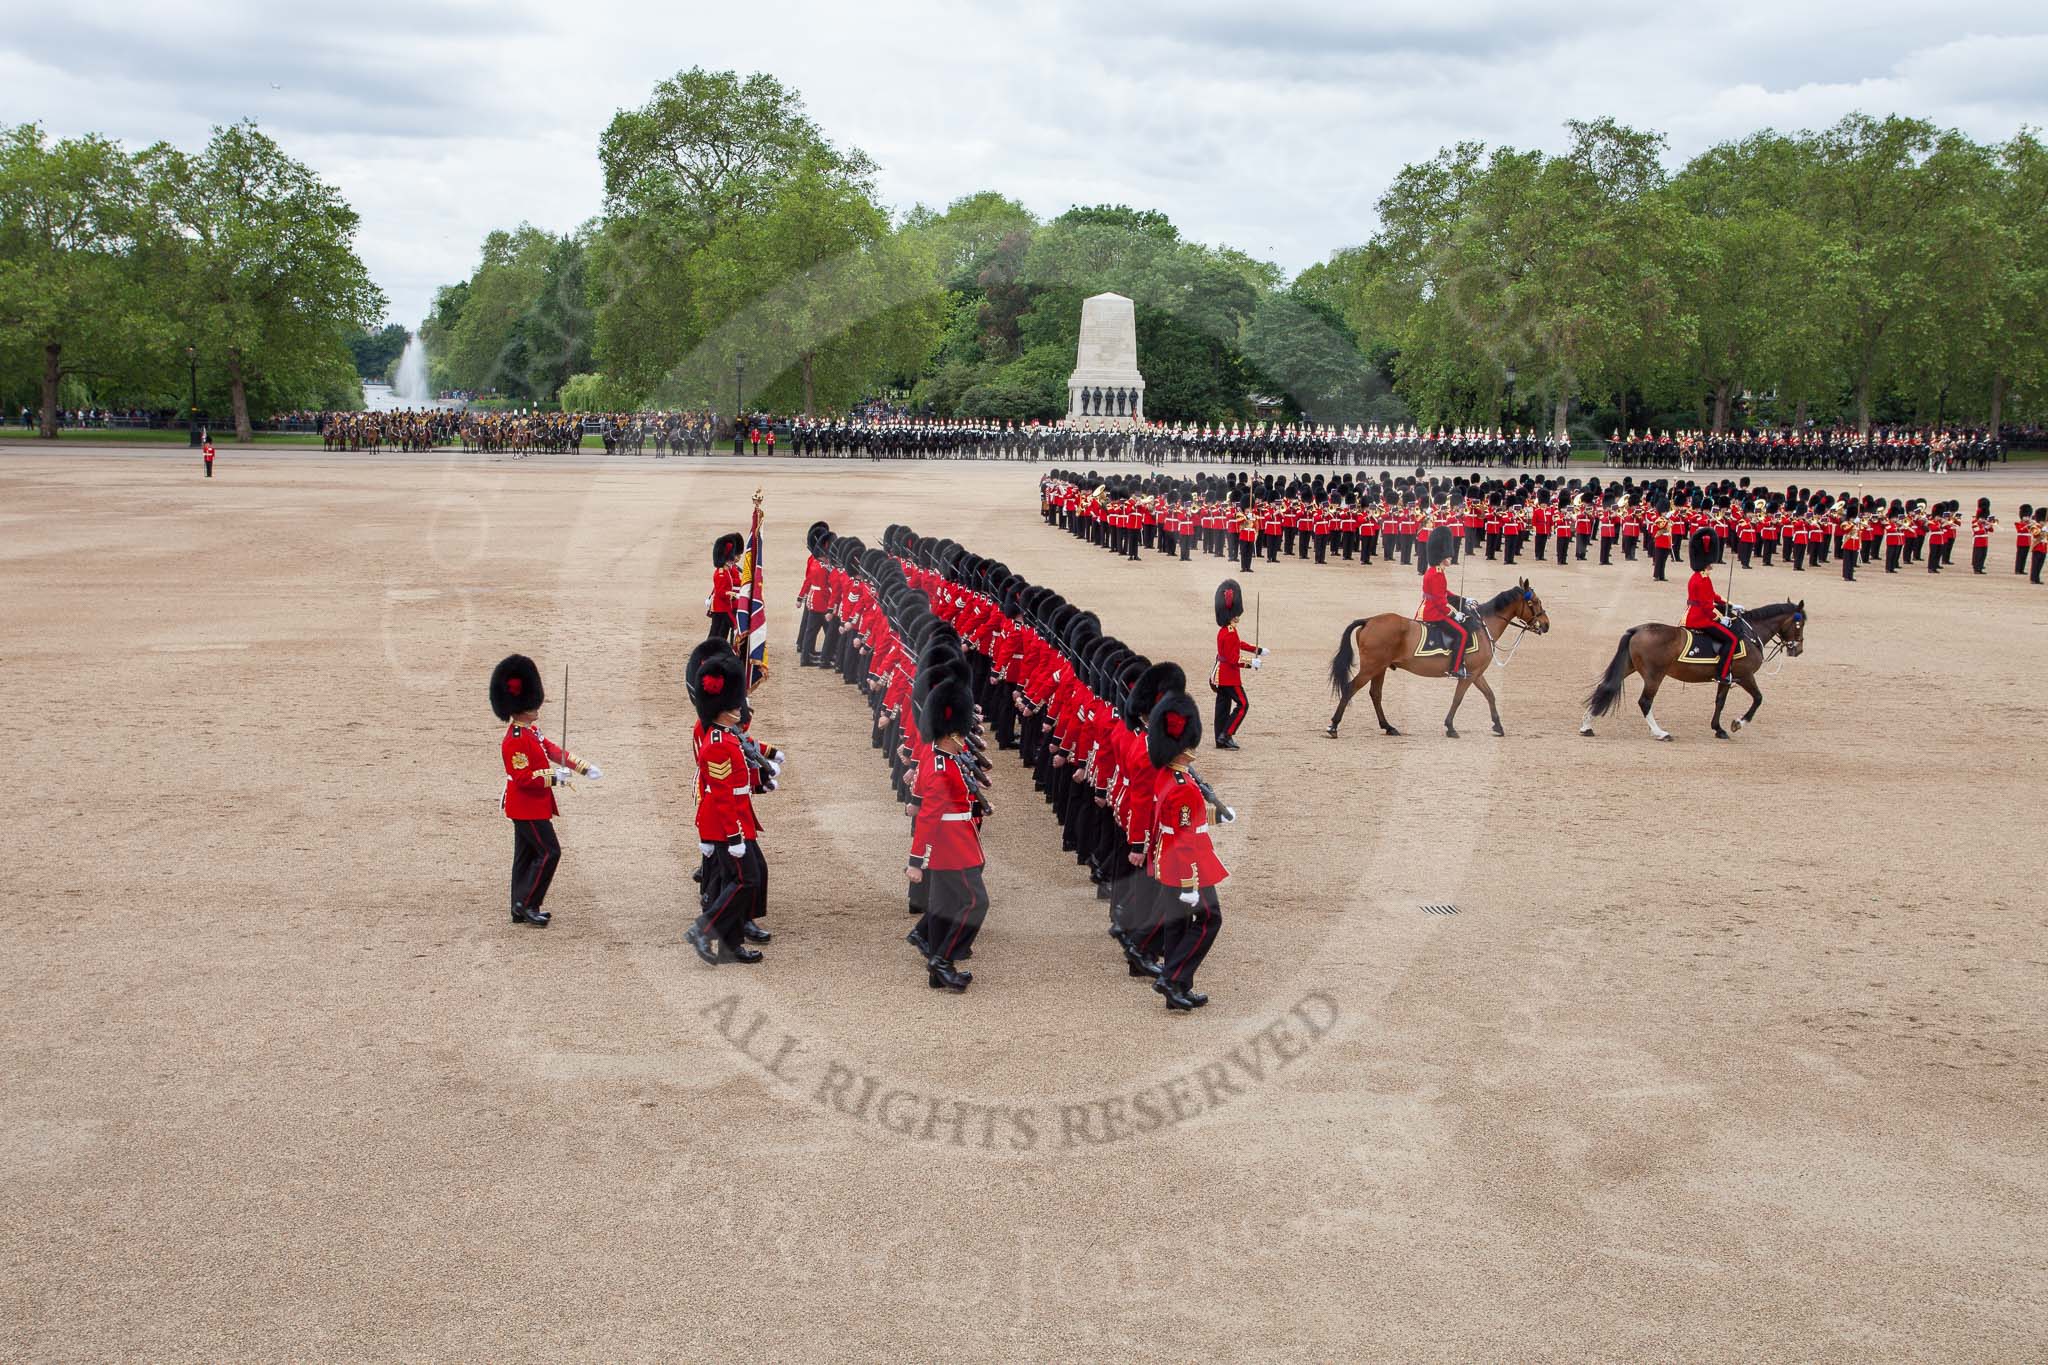 The Colonel's Review 2012: Another overview of Horse Guards Parade during the March Past. The Field Officer, in front of the Major of the Parade, on the right..
Horse Guards Parade, Westminster,
London SW1,

United Kingdom,
on 09 June 2012 at 11:43, image #339